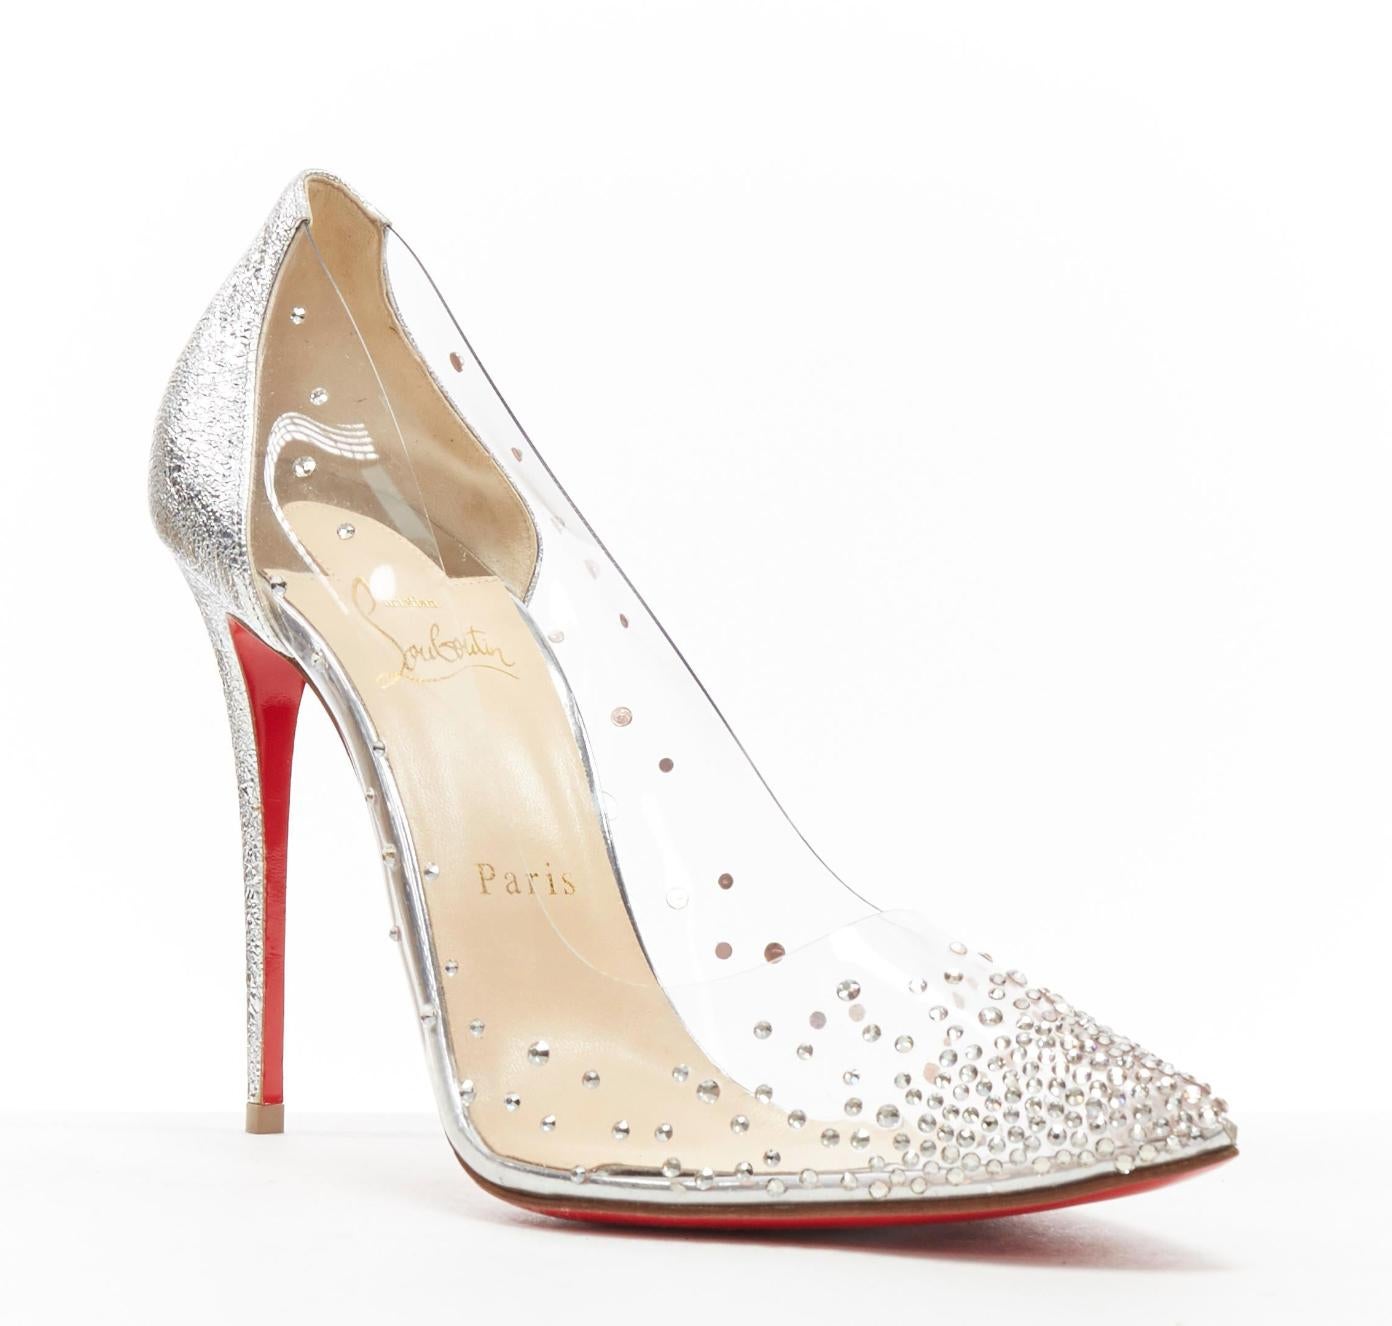 new CHRISTIAN LOUBOUTIN Degrastrass 100 clear PVC silver strass bridal pump EU40
Reference: TGAS/A04409
Brand: Christian Louboutin
Model: Degrastrass 100
Material: PVC
Color: Silver
Pattern: Solid
Extra Details: Style code: 1180606
Made in: